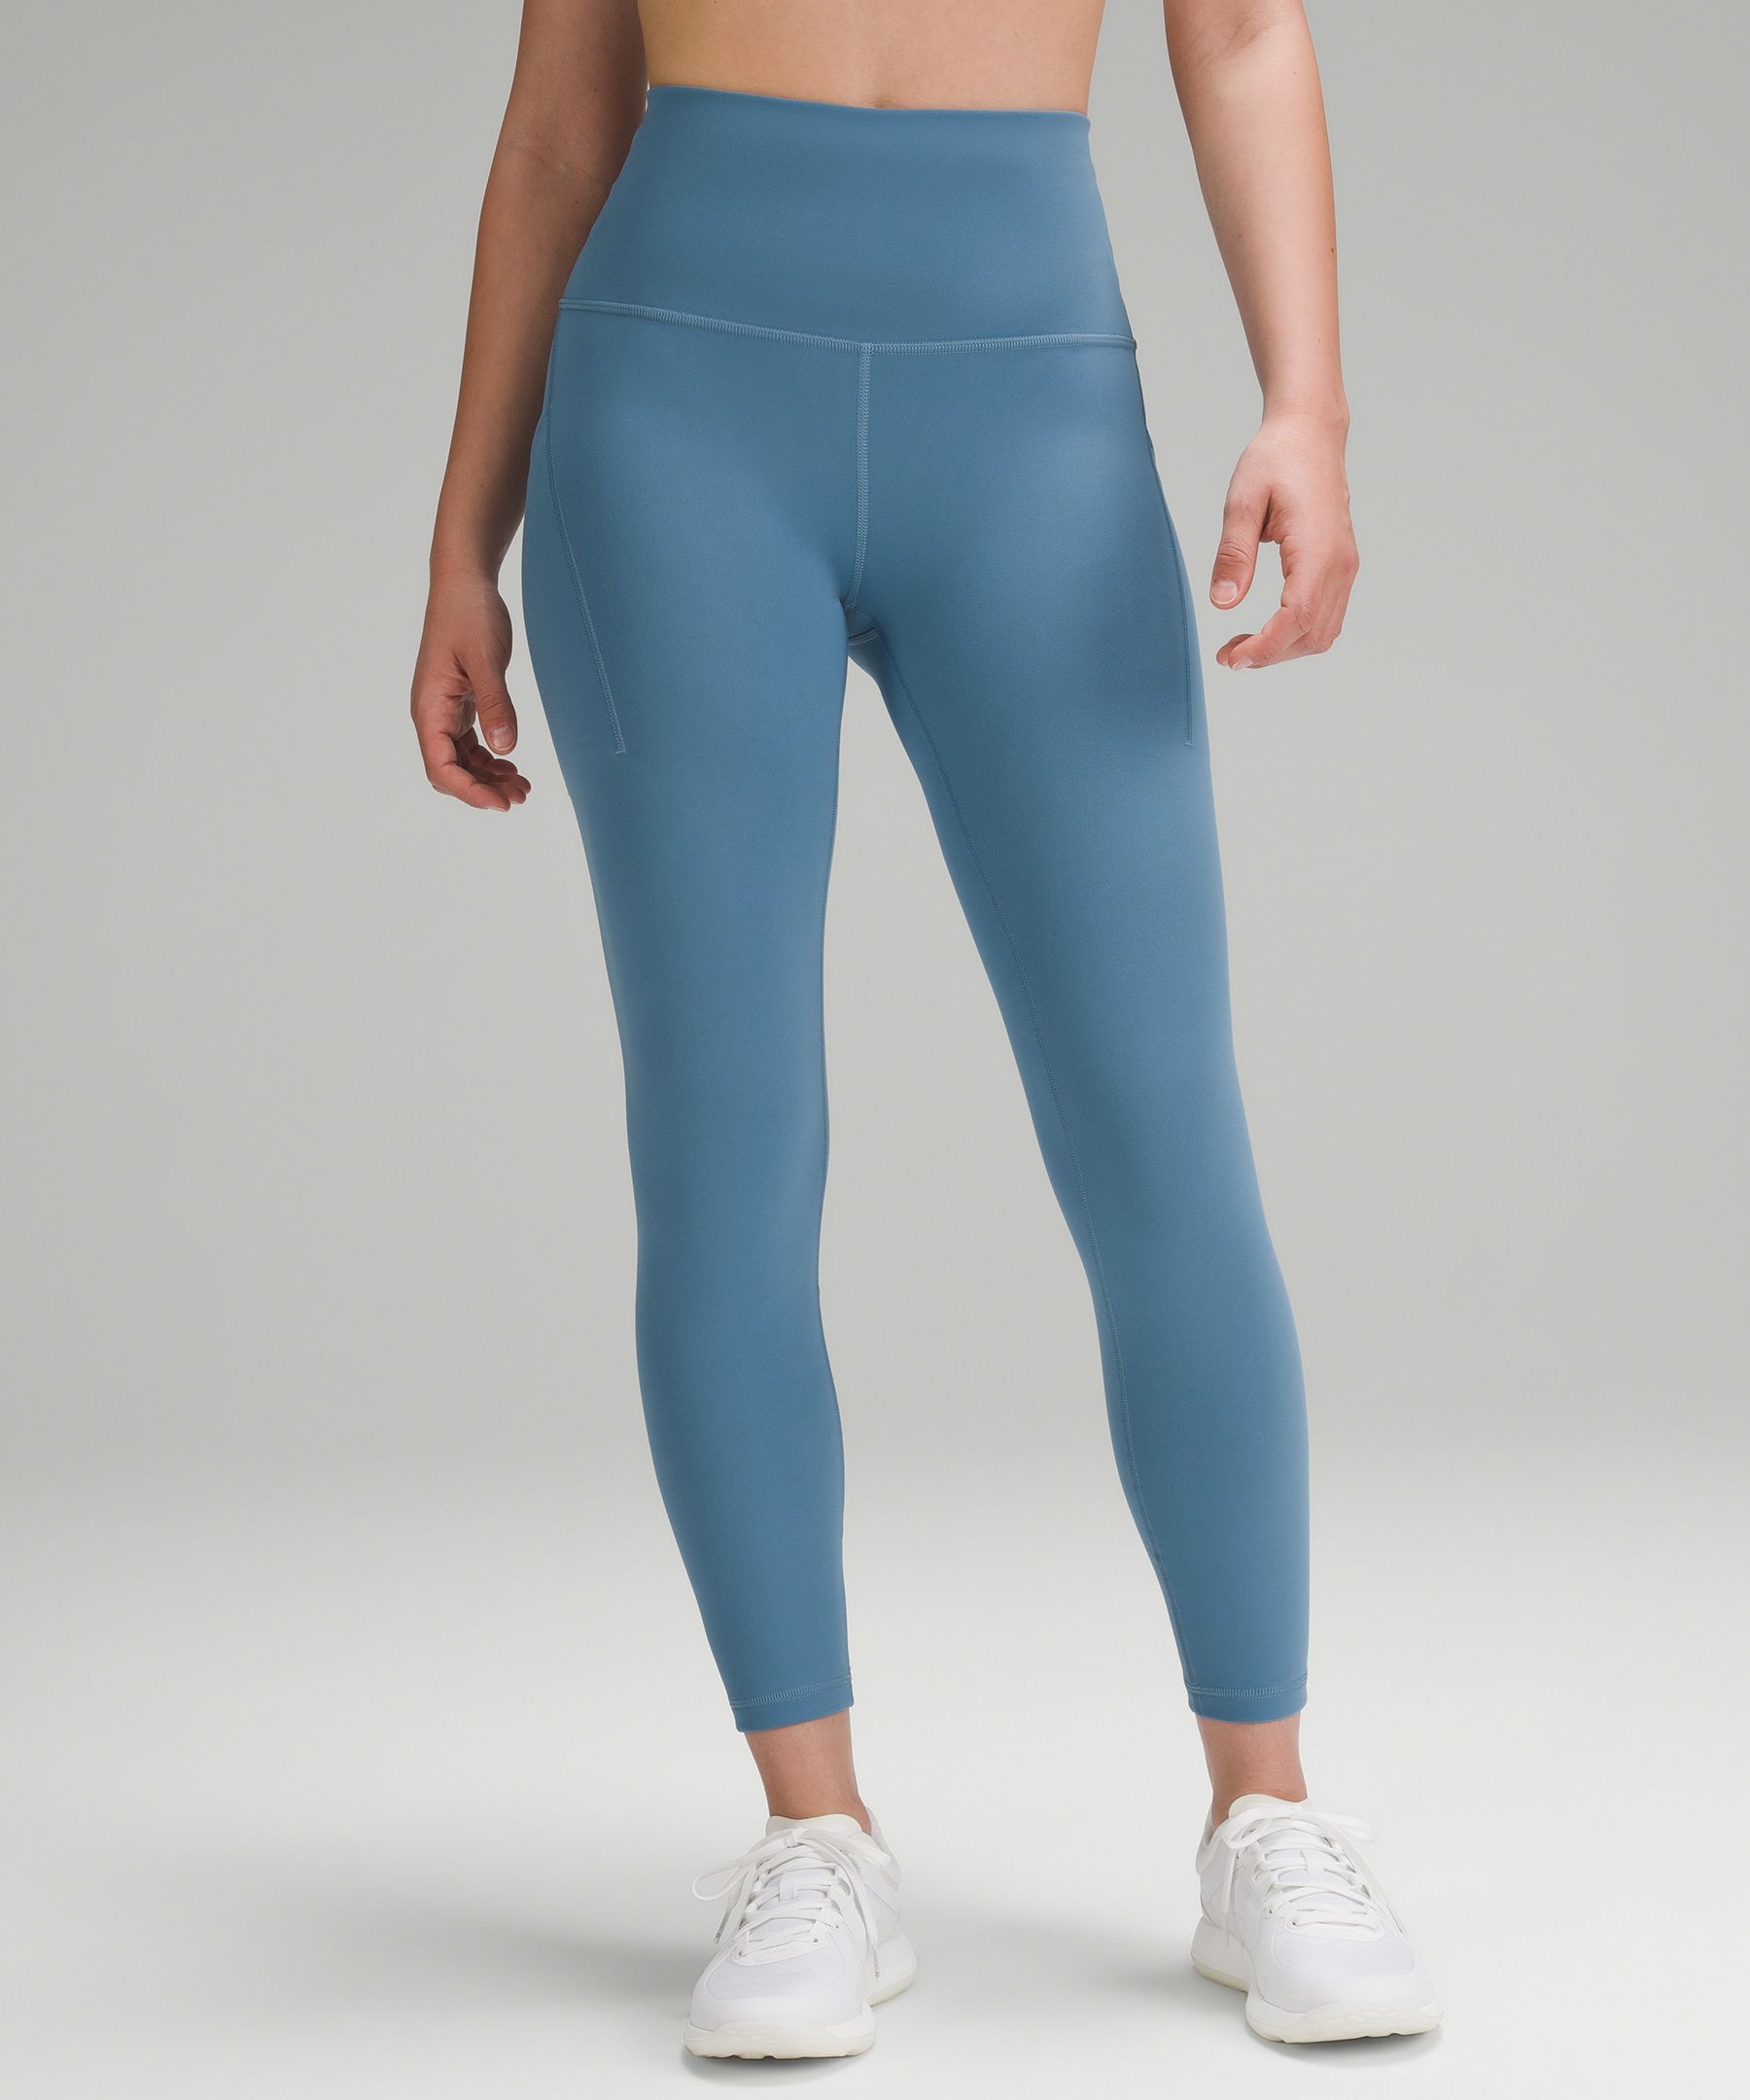 Lululemon Wunder Train High-Rise Tight with Pockets 25". 1